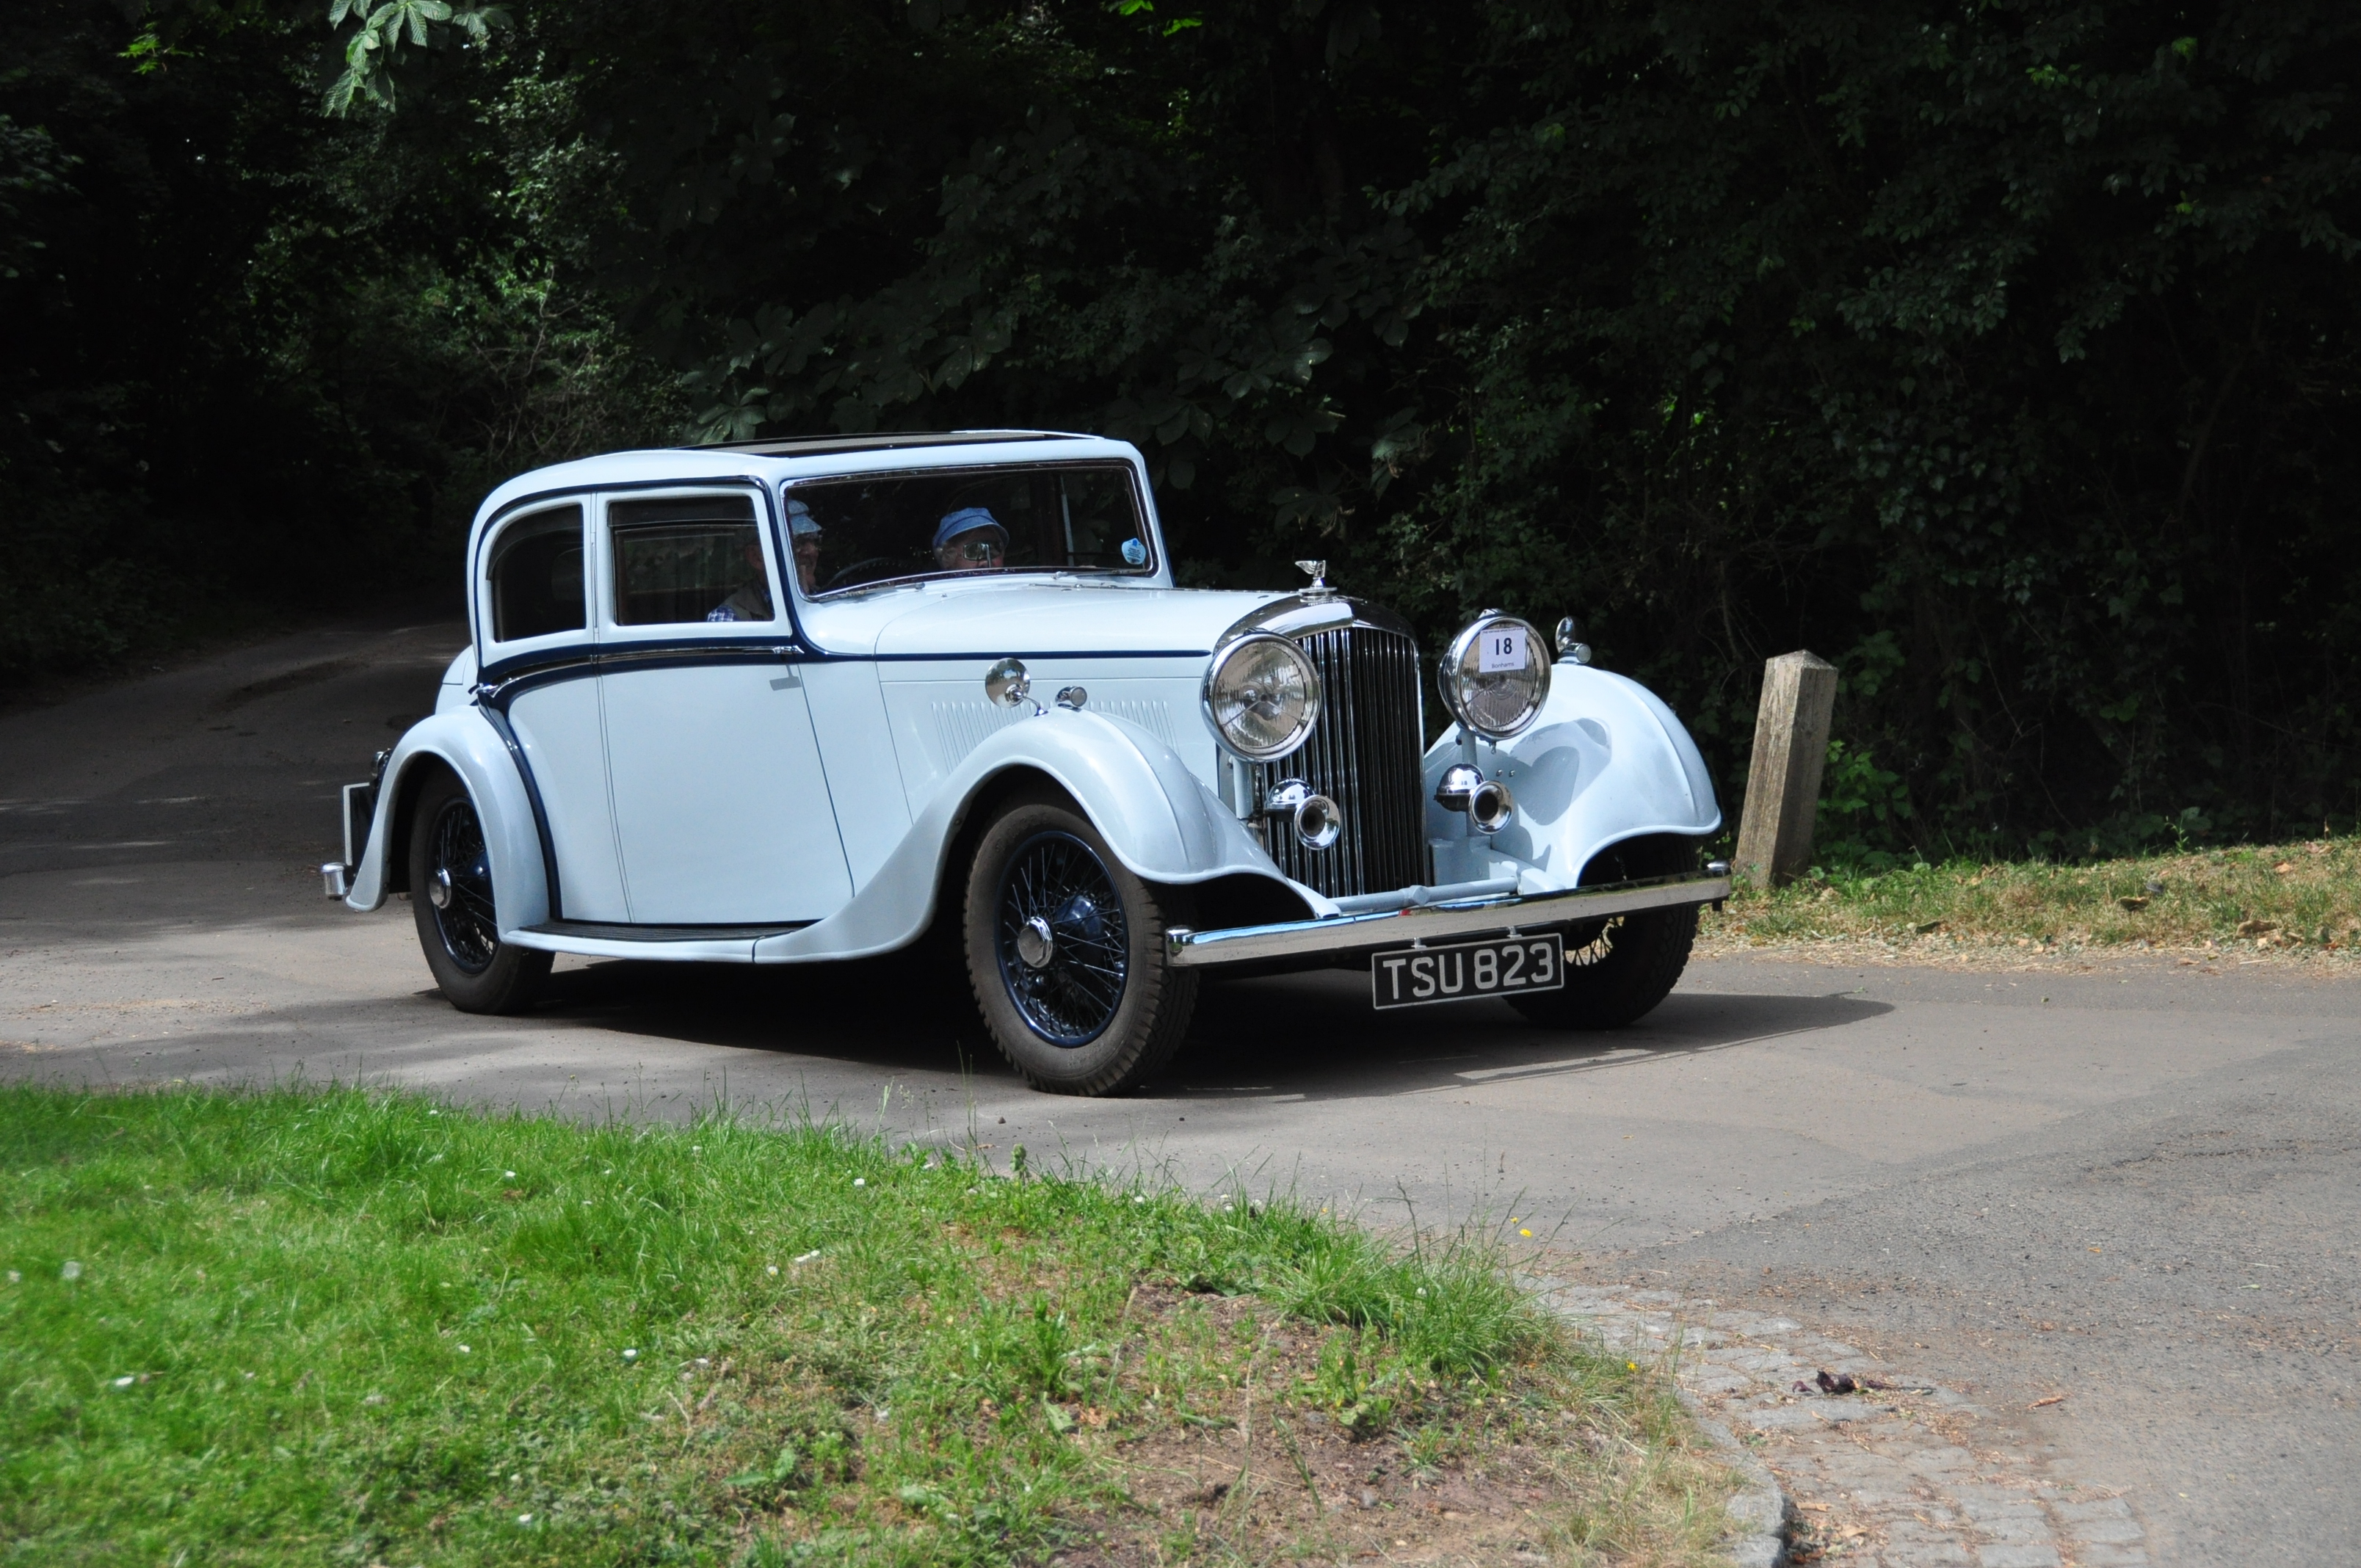 Entries are now open for the VSCC (South Downs) Summer Rally on 30th July 2022 near Liphook